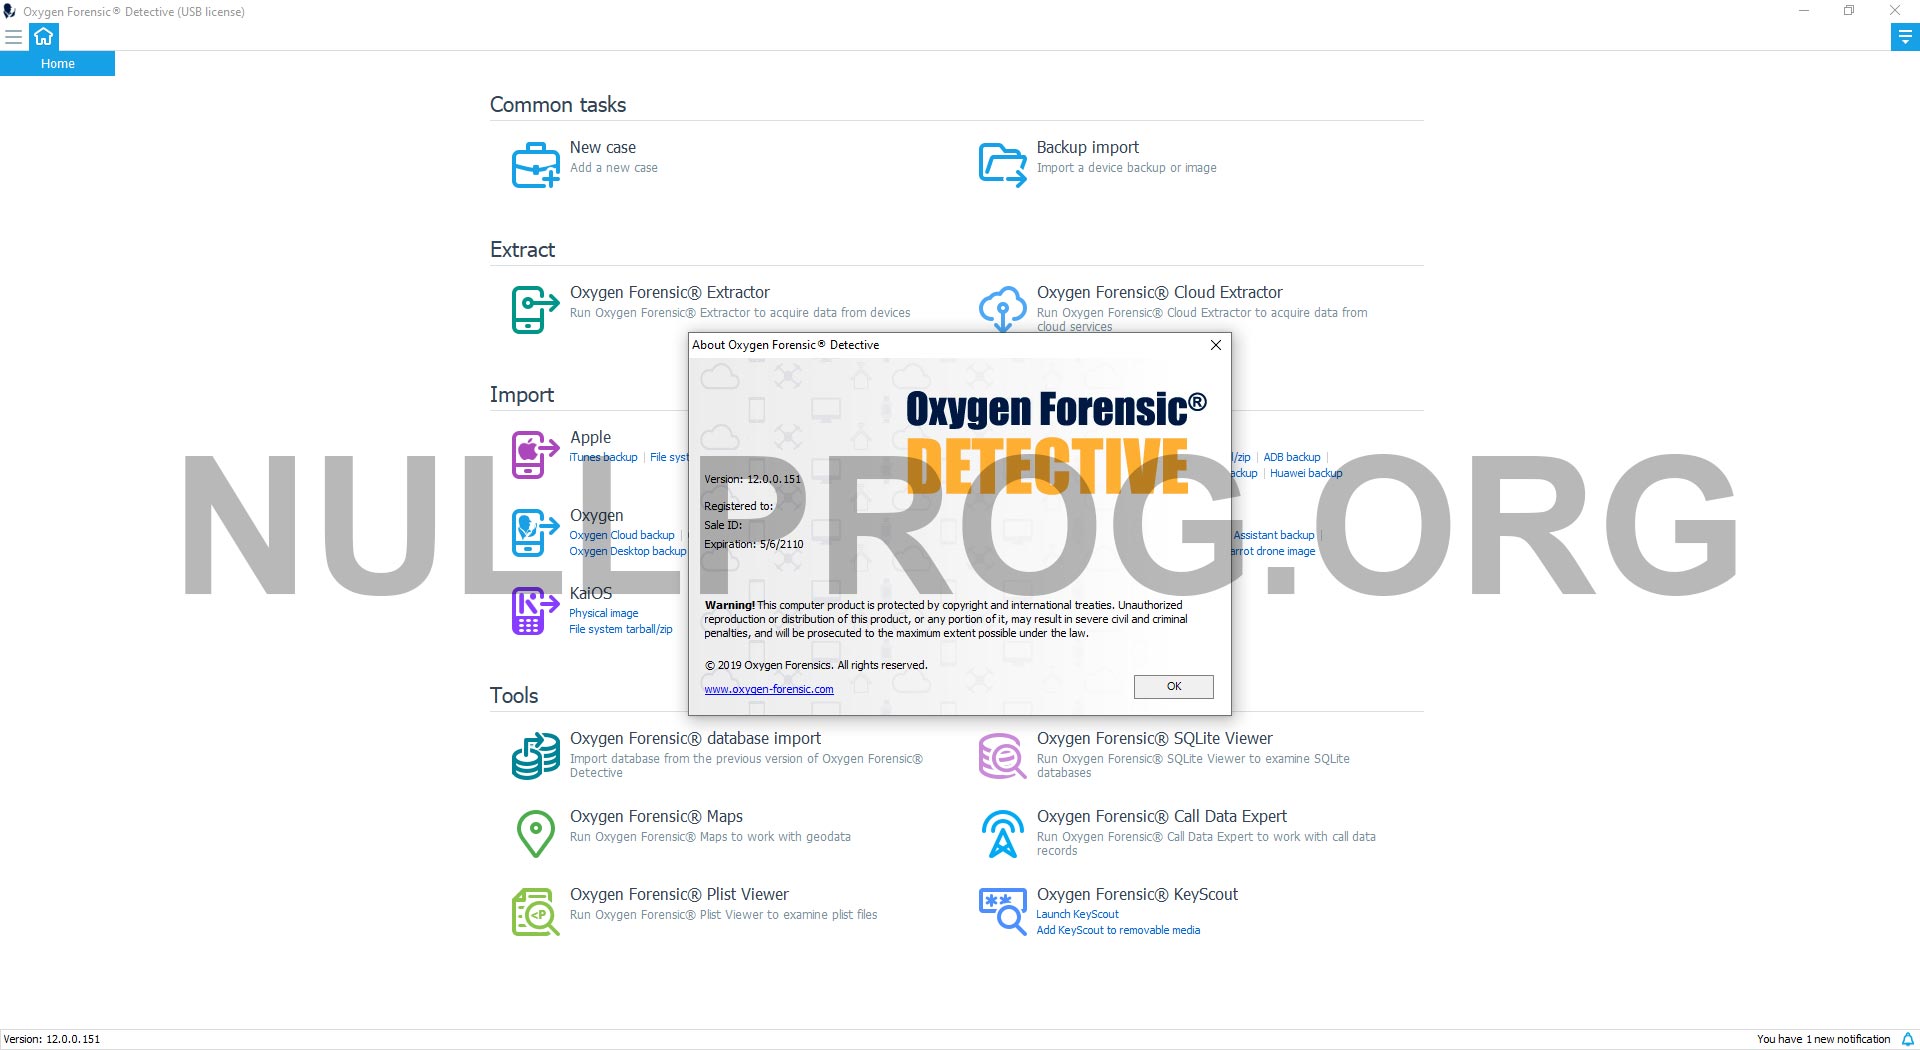 oxygen forensic detective 10.4